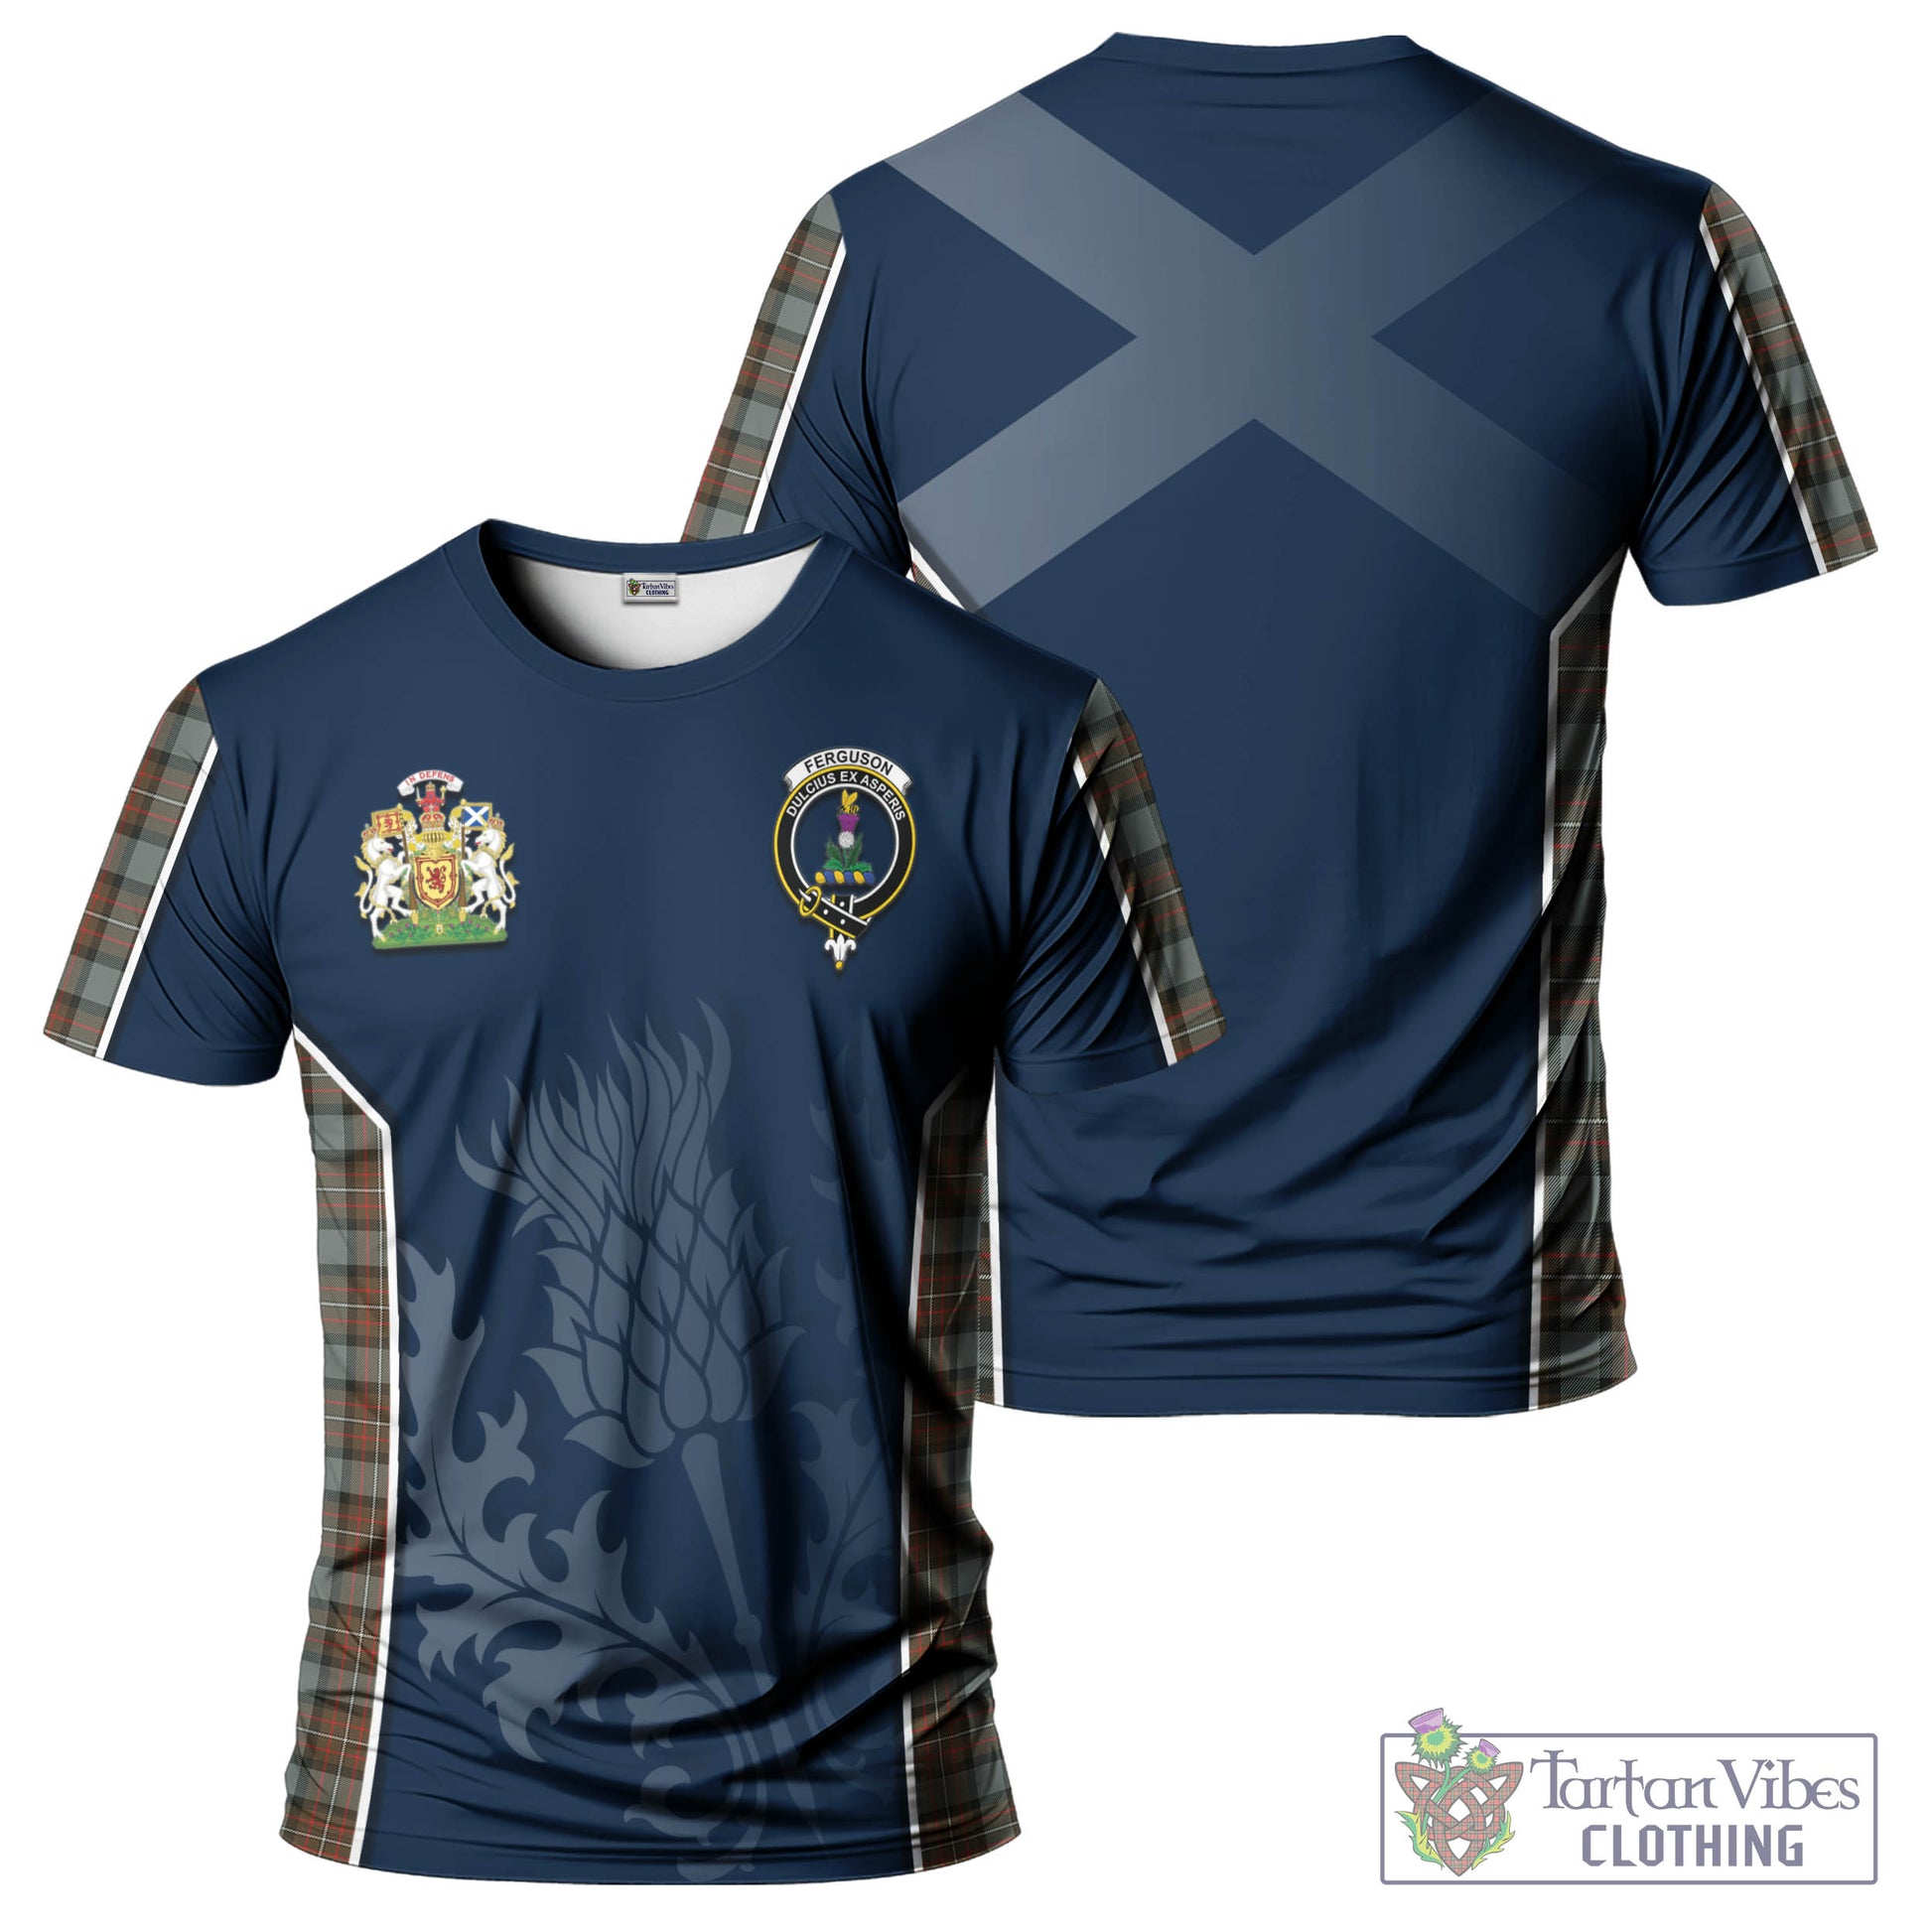 Tartan Vibes Clothing Ferguson Weathered Tartan T-Shirt with Family Crest and Scottish Thistle Vibes Sport Style